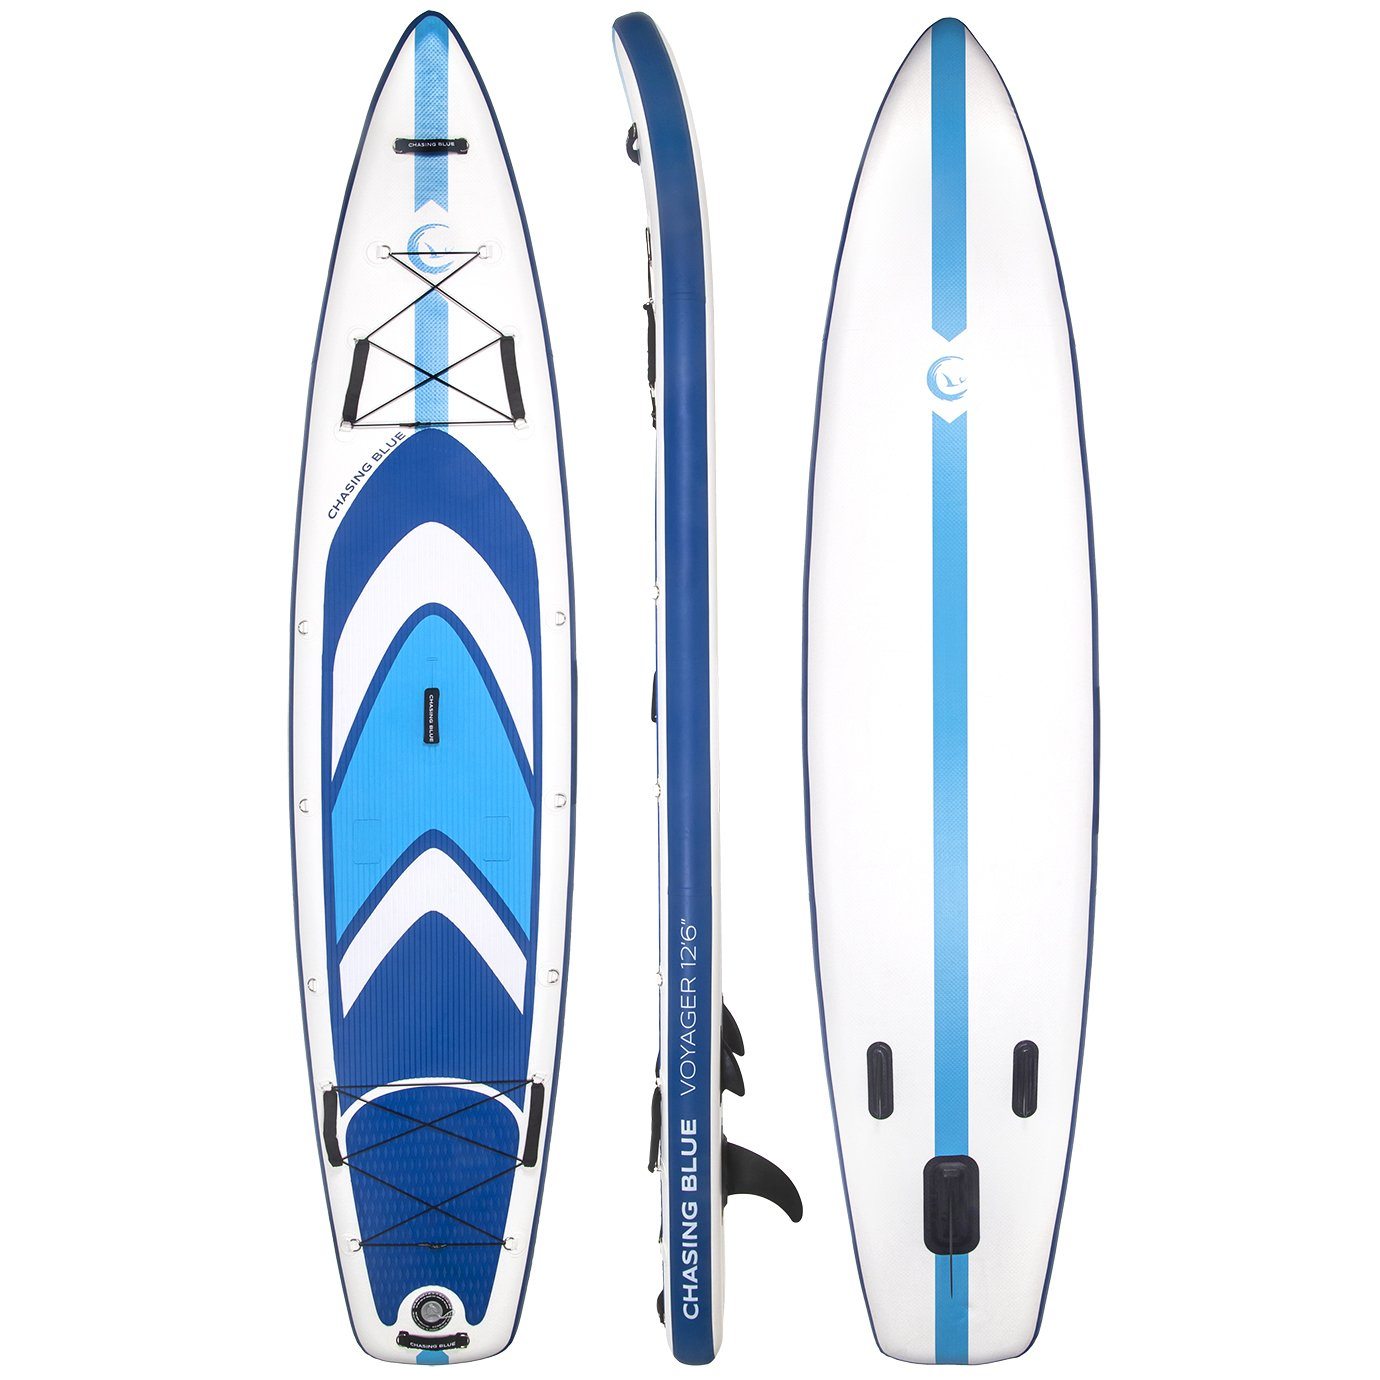 ORION - VOYAGER iSUP BOARD OutdoorMaster 